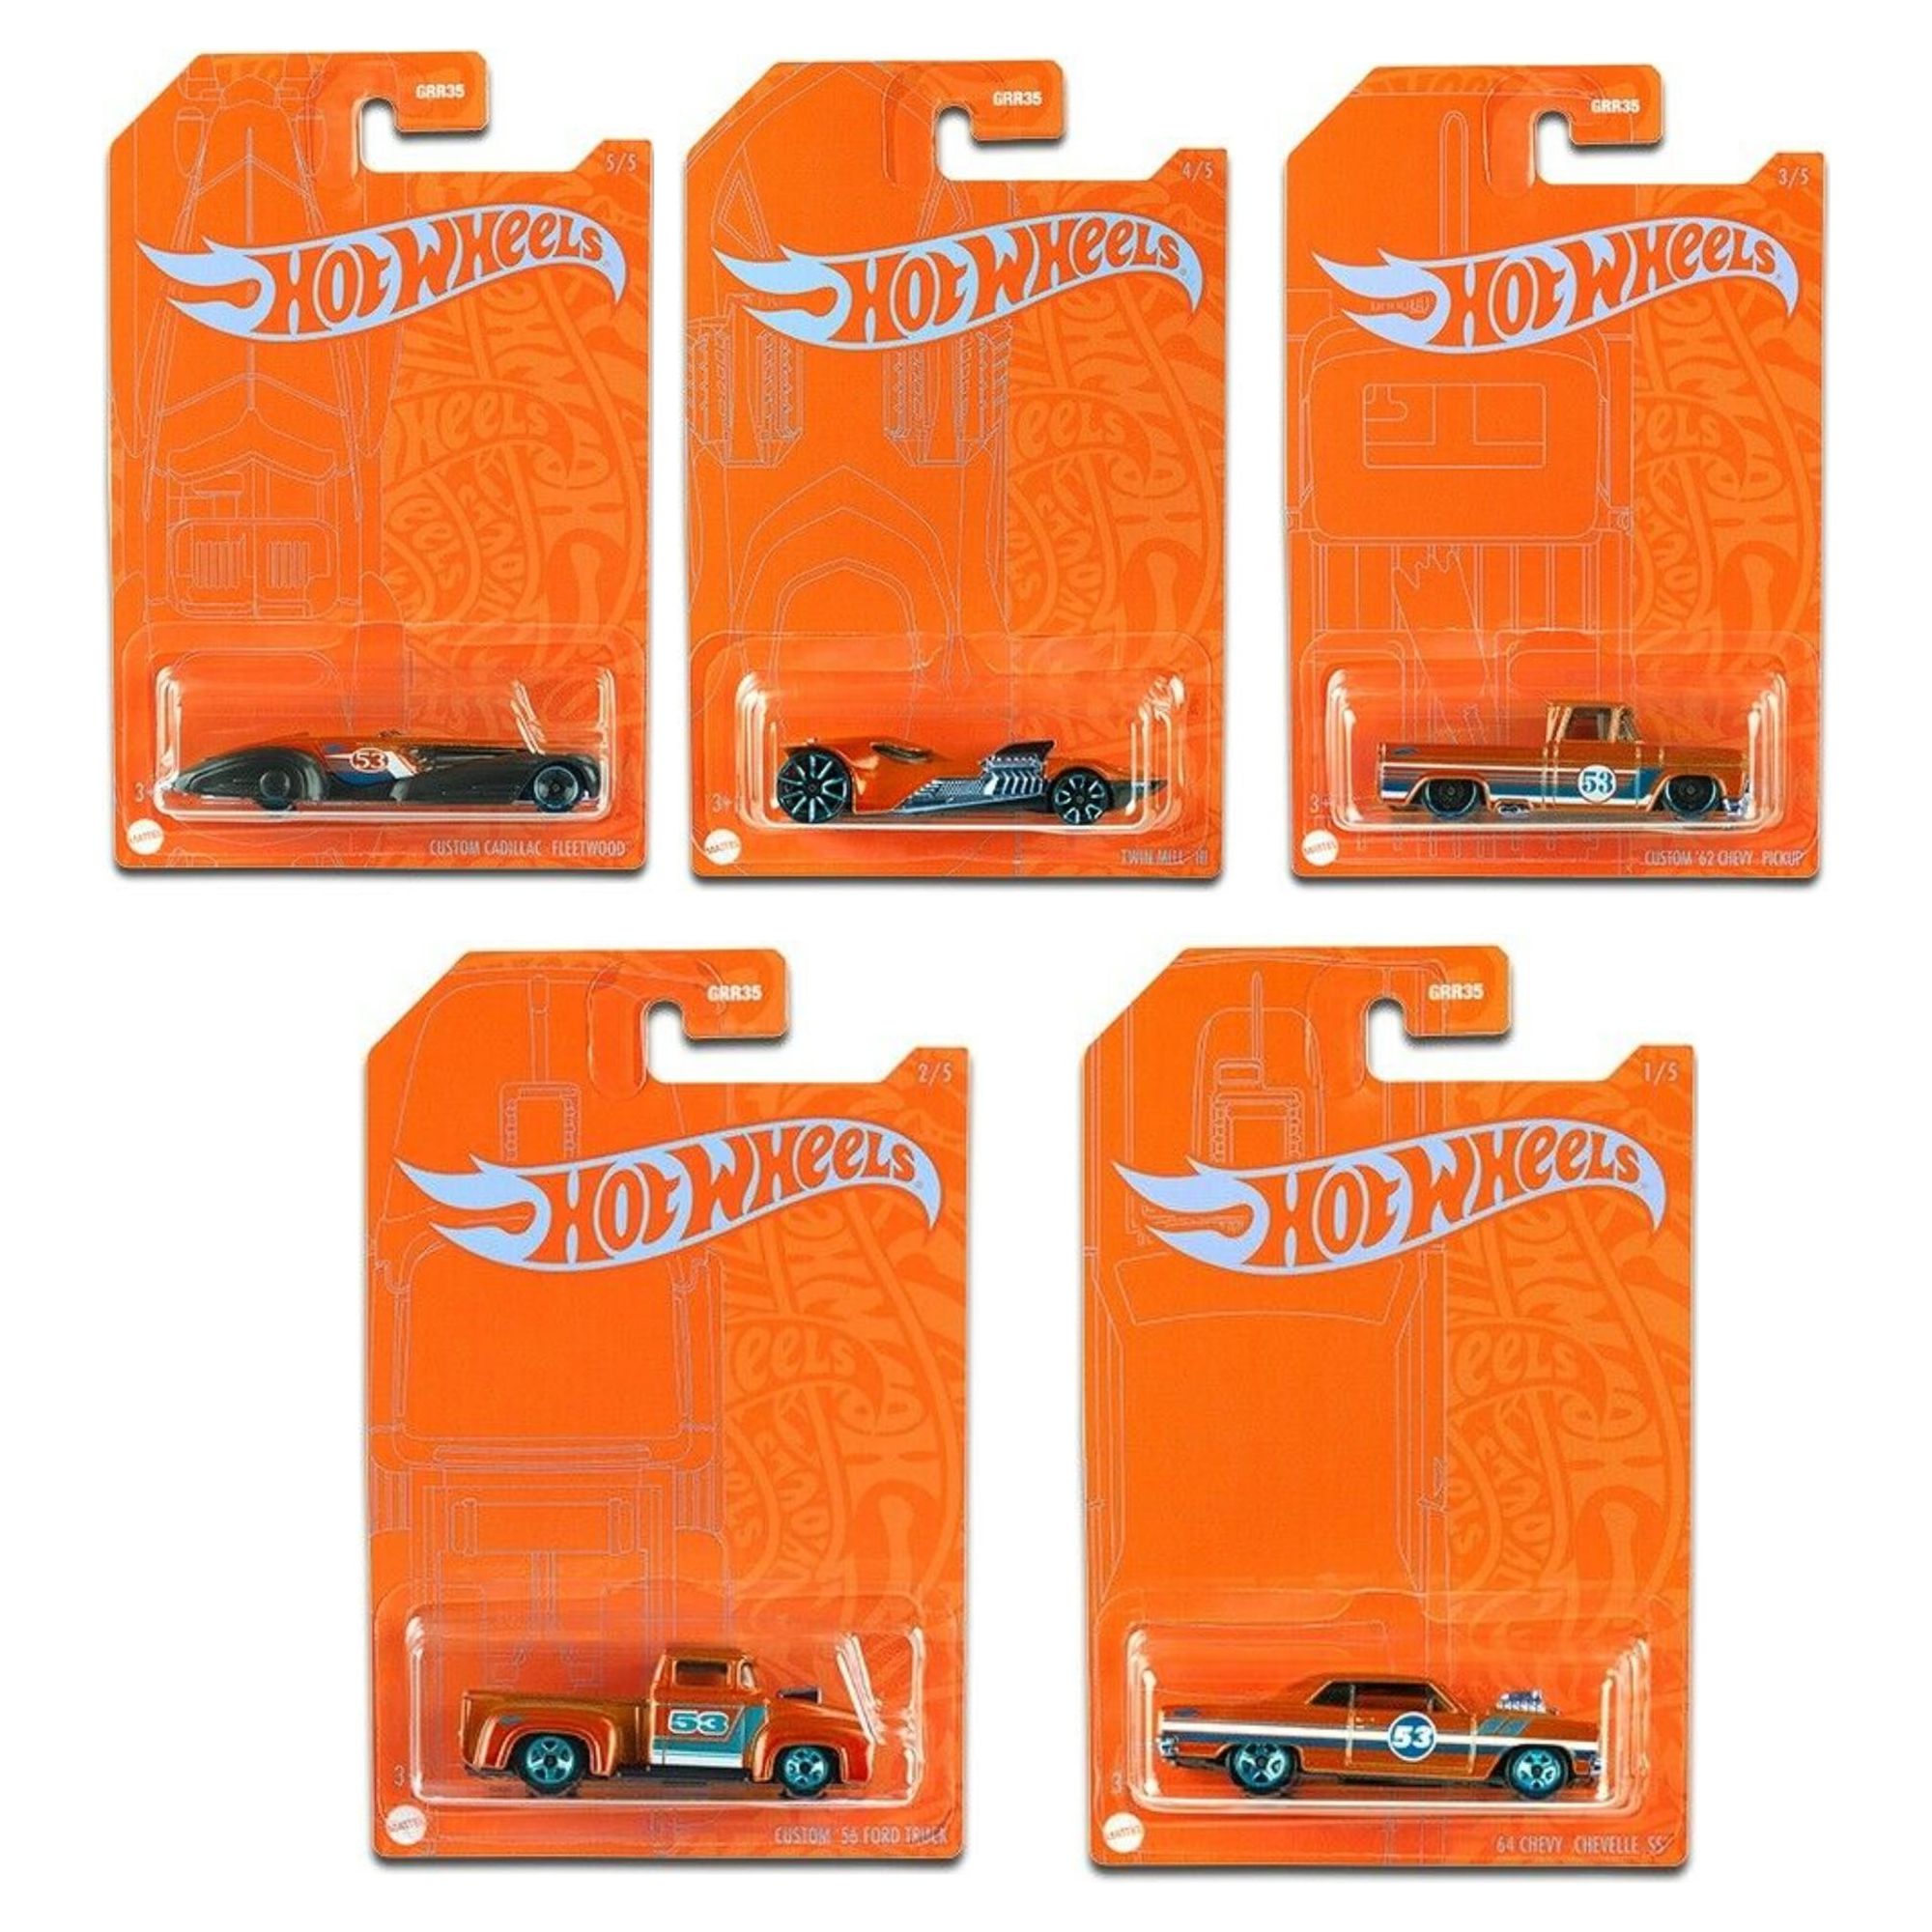 53rd Anniversary Complete Set of 5 Die-Cast Cars Exclusive Orange  Edition Collectors For Hot Wheels Vehicles Action Toy Collectibles 64 Chevy Chevelle SS Cadillac Fleetwood  56 Ford Truck - image 1 of 6